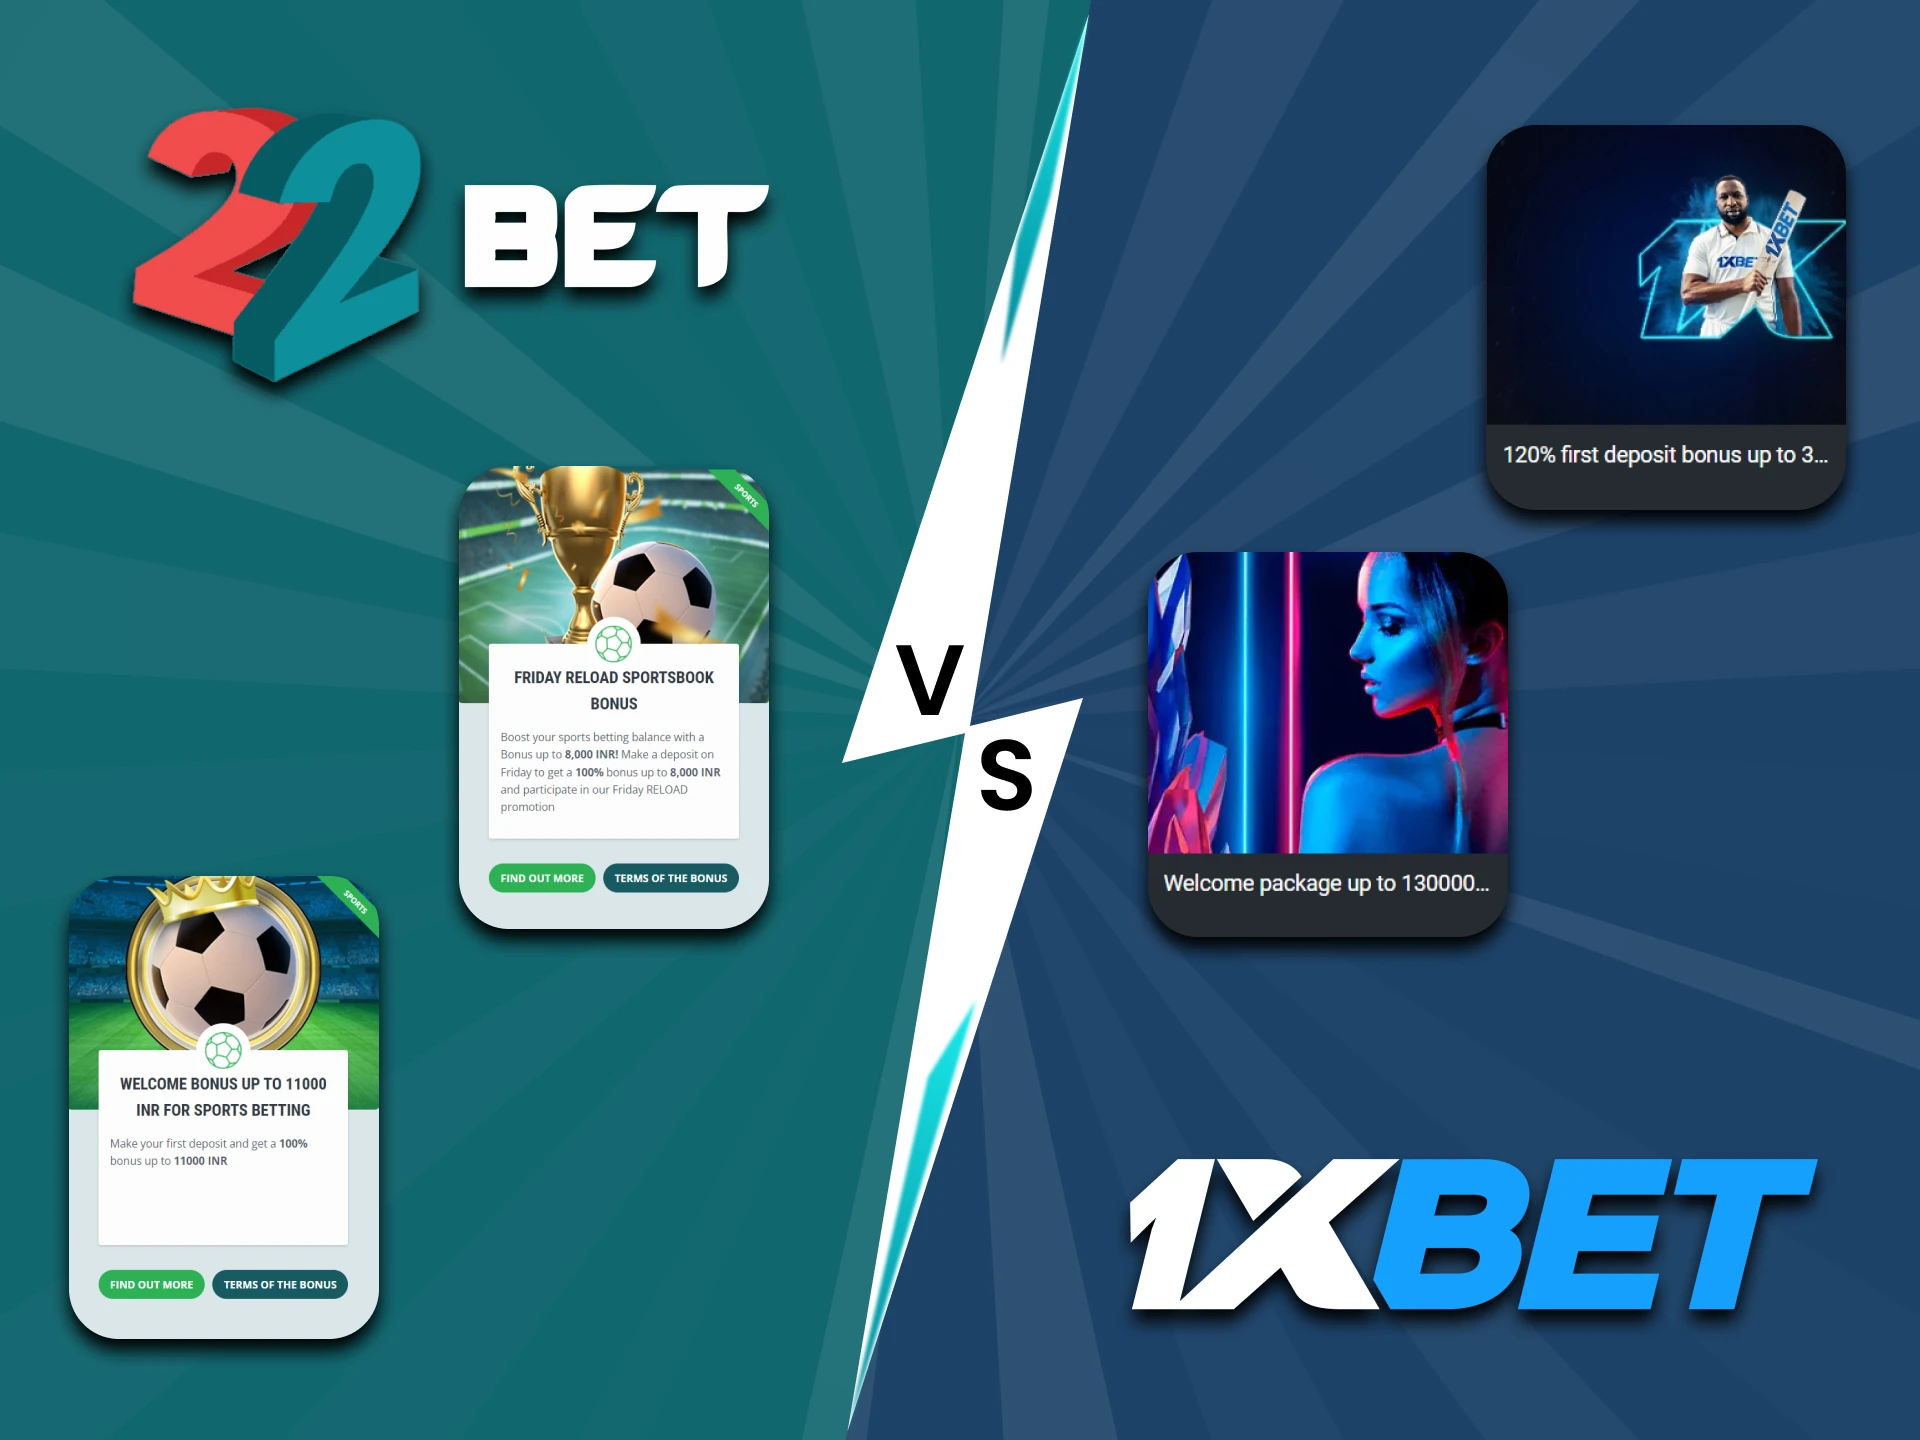 Find out about the differences in bonuses between 22bet and 1xbet.